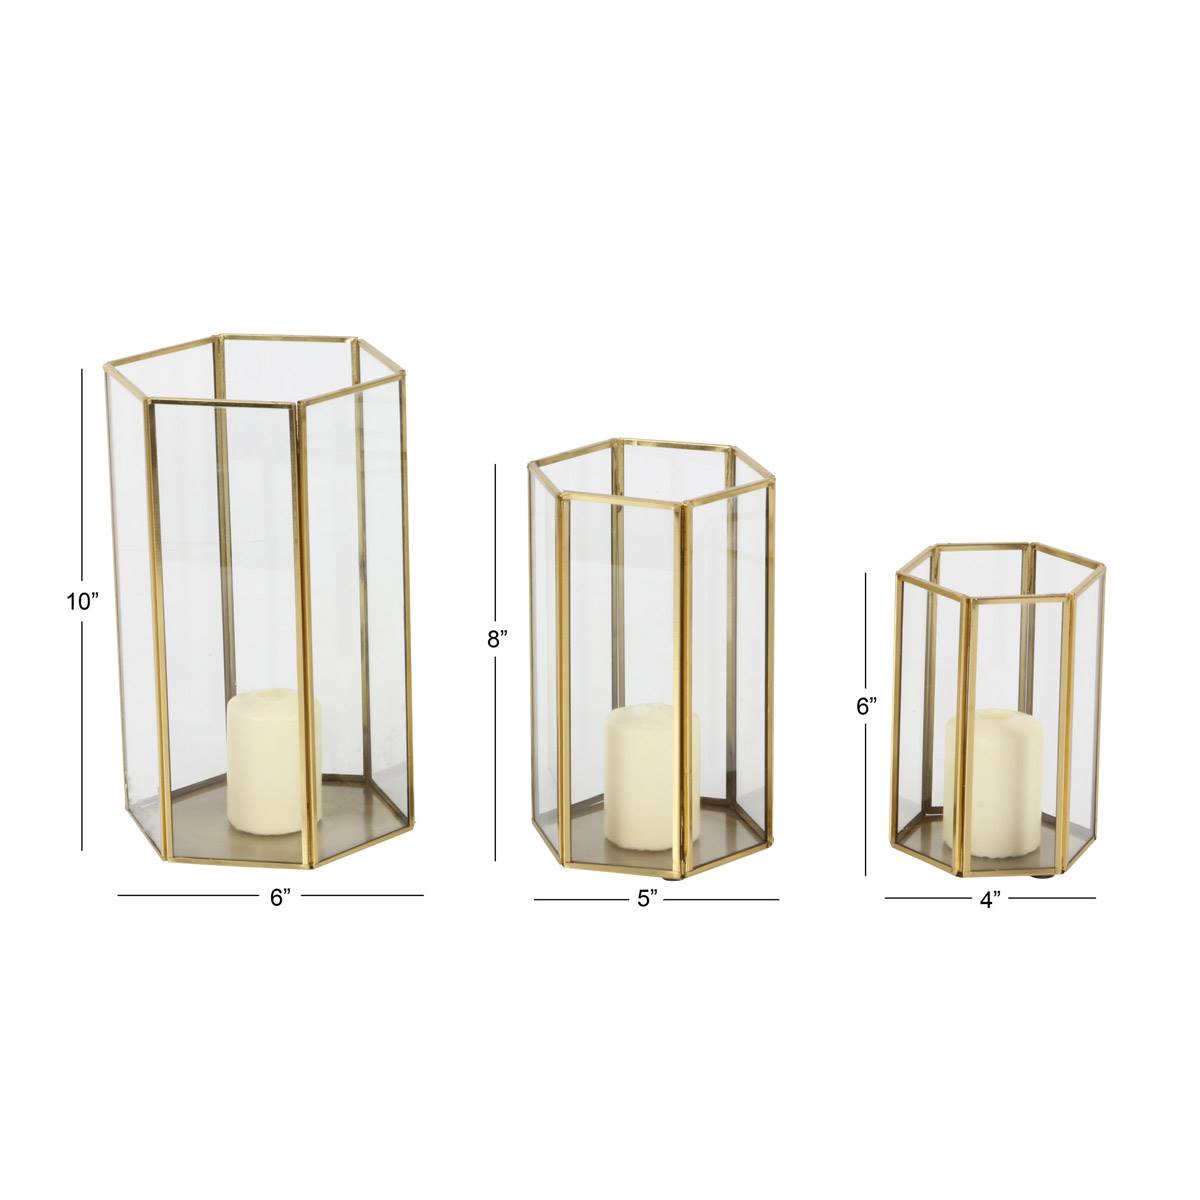 9th & Pike(R) Hurricane Candle Holders - Set Of 3